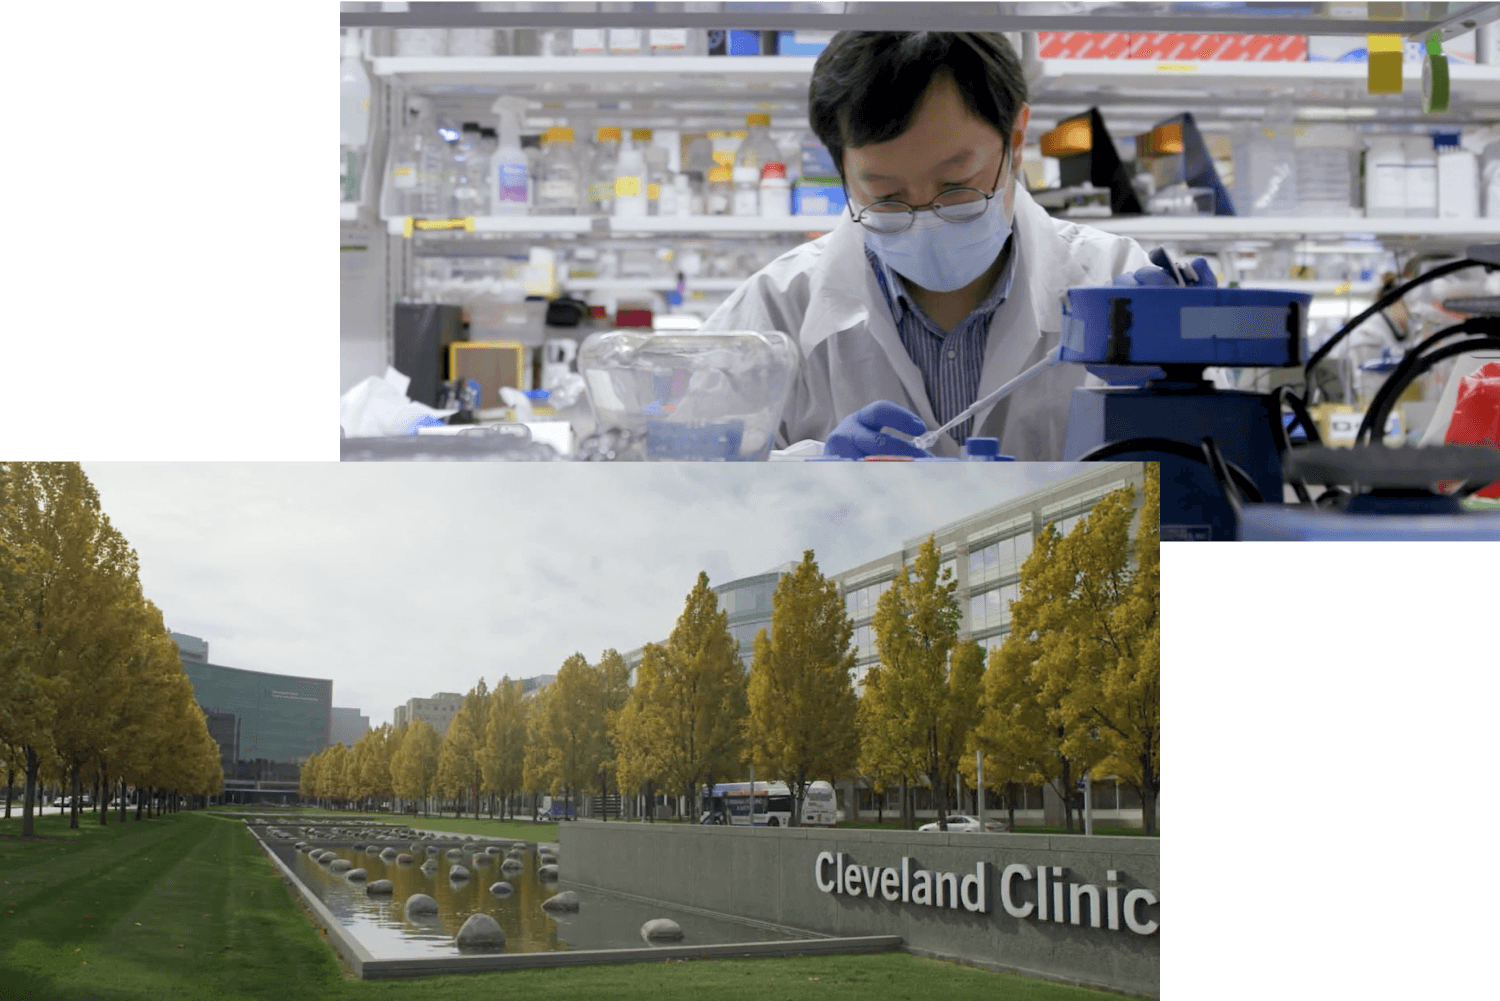 Research at Cleveland Clinic's campus in Ohio